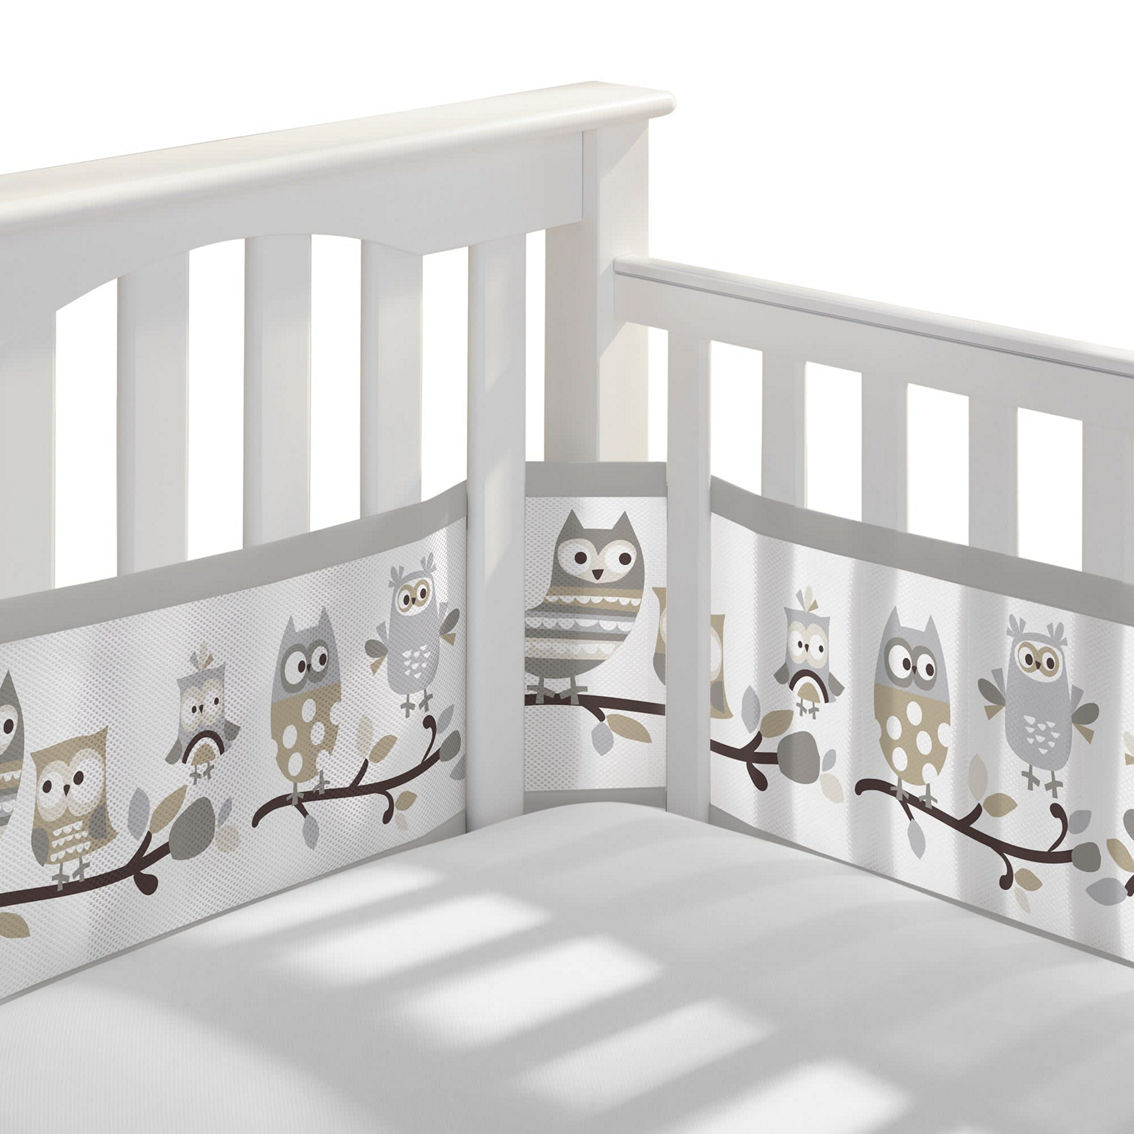 BreathableBaby Breathable Mesh Liner For Full-Size Cribs, Classic - Image 2 of 5